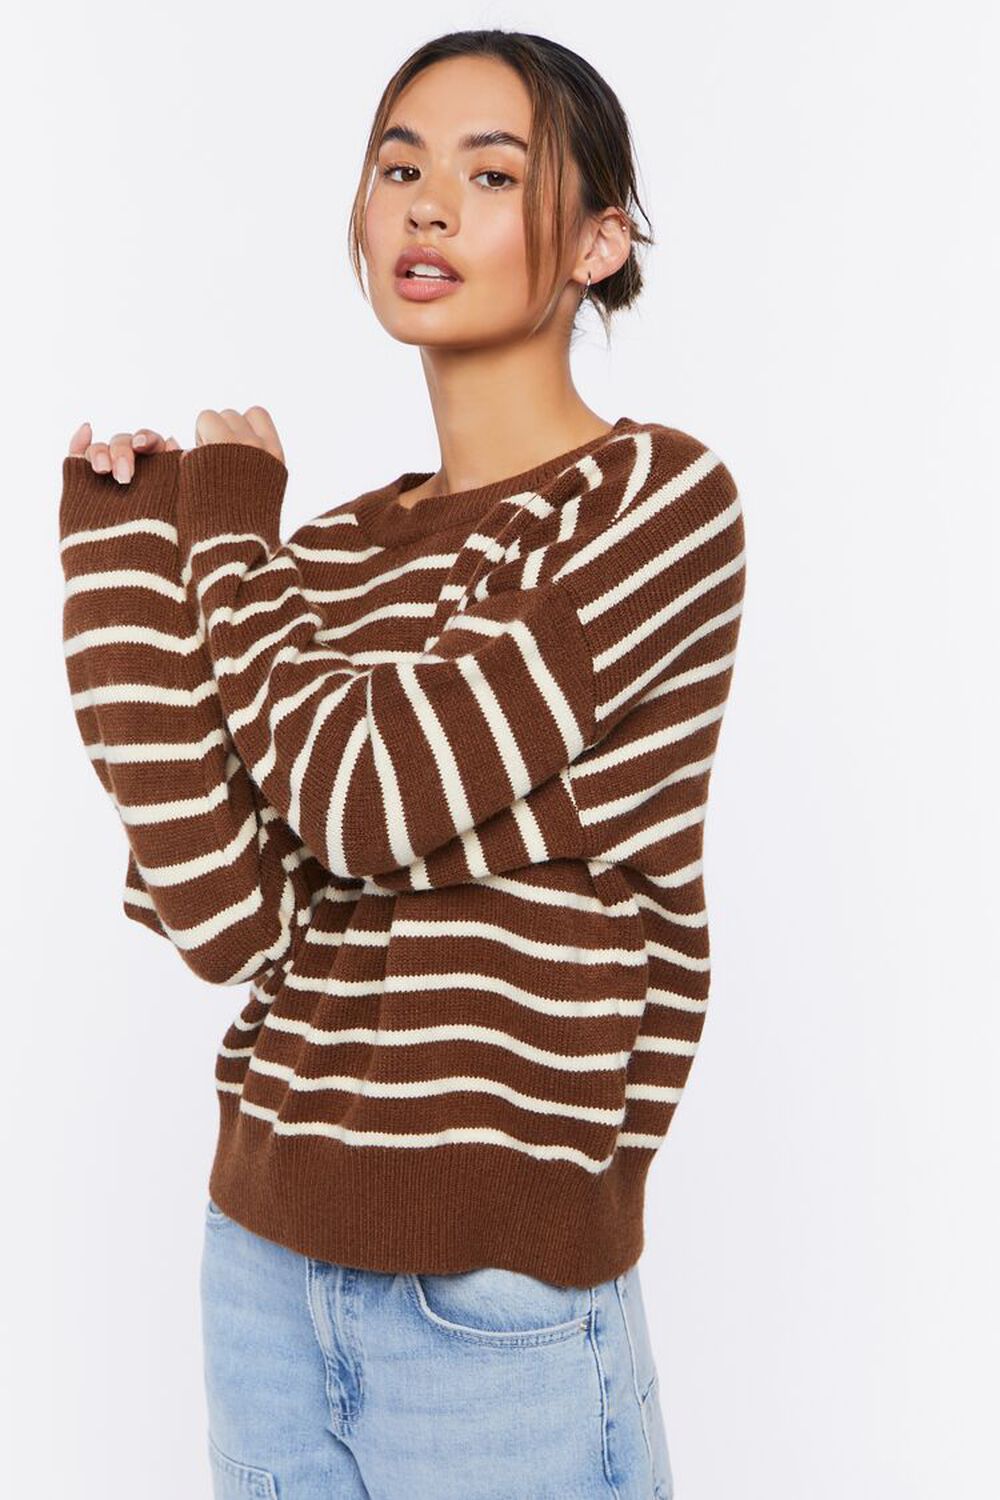 BROWN/WHITE Striped Button-Back Sweater, image 2